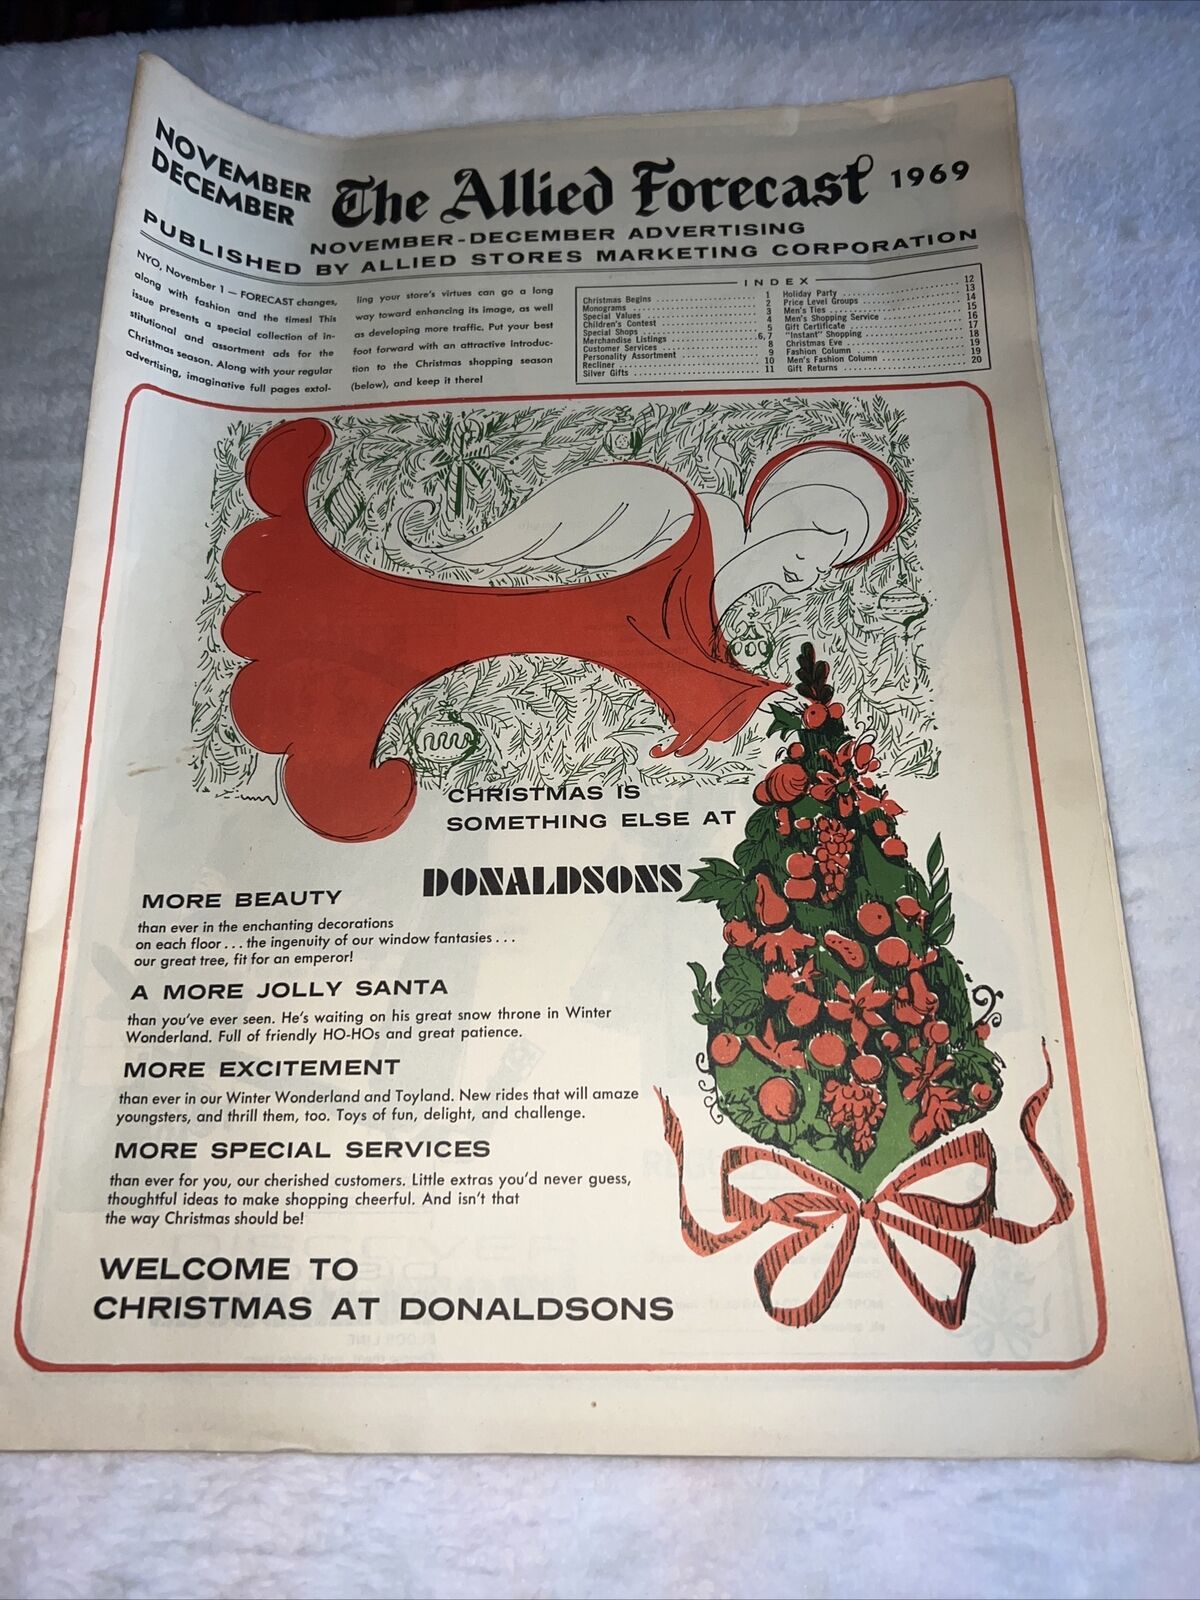 vintage newspaper The Allied Forecast 1969 Christmas at Donaldsons fd86